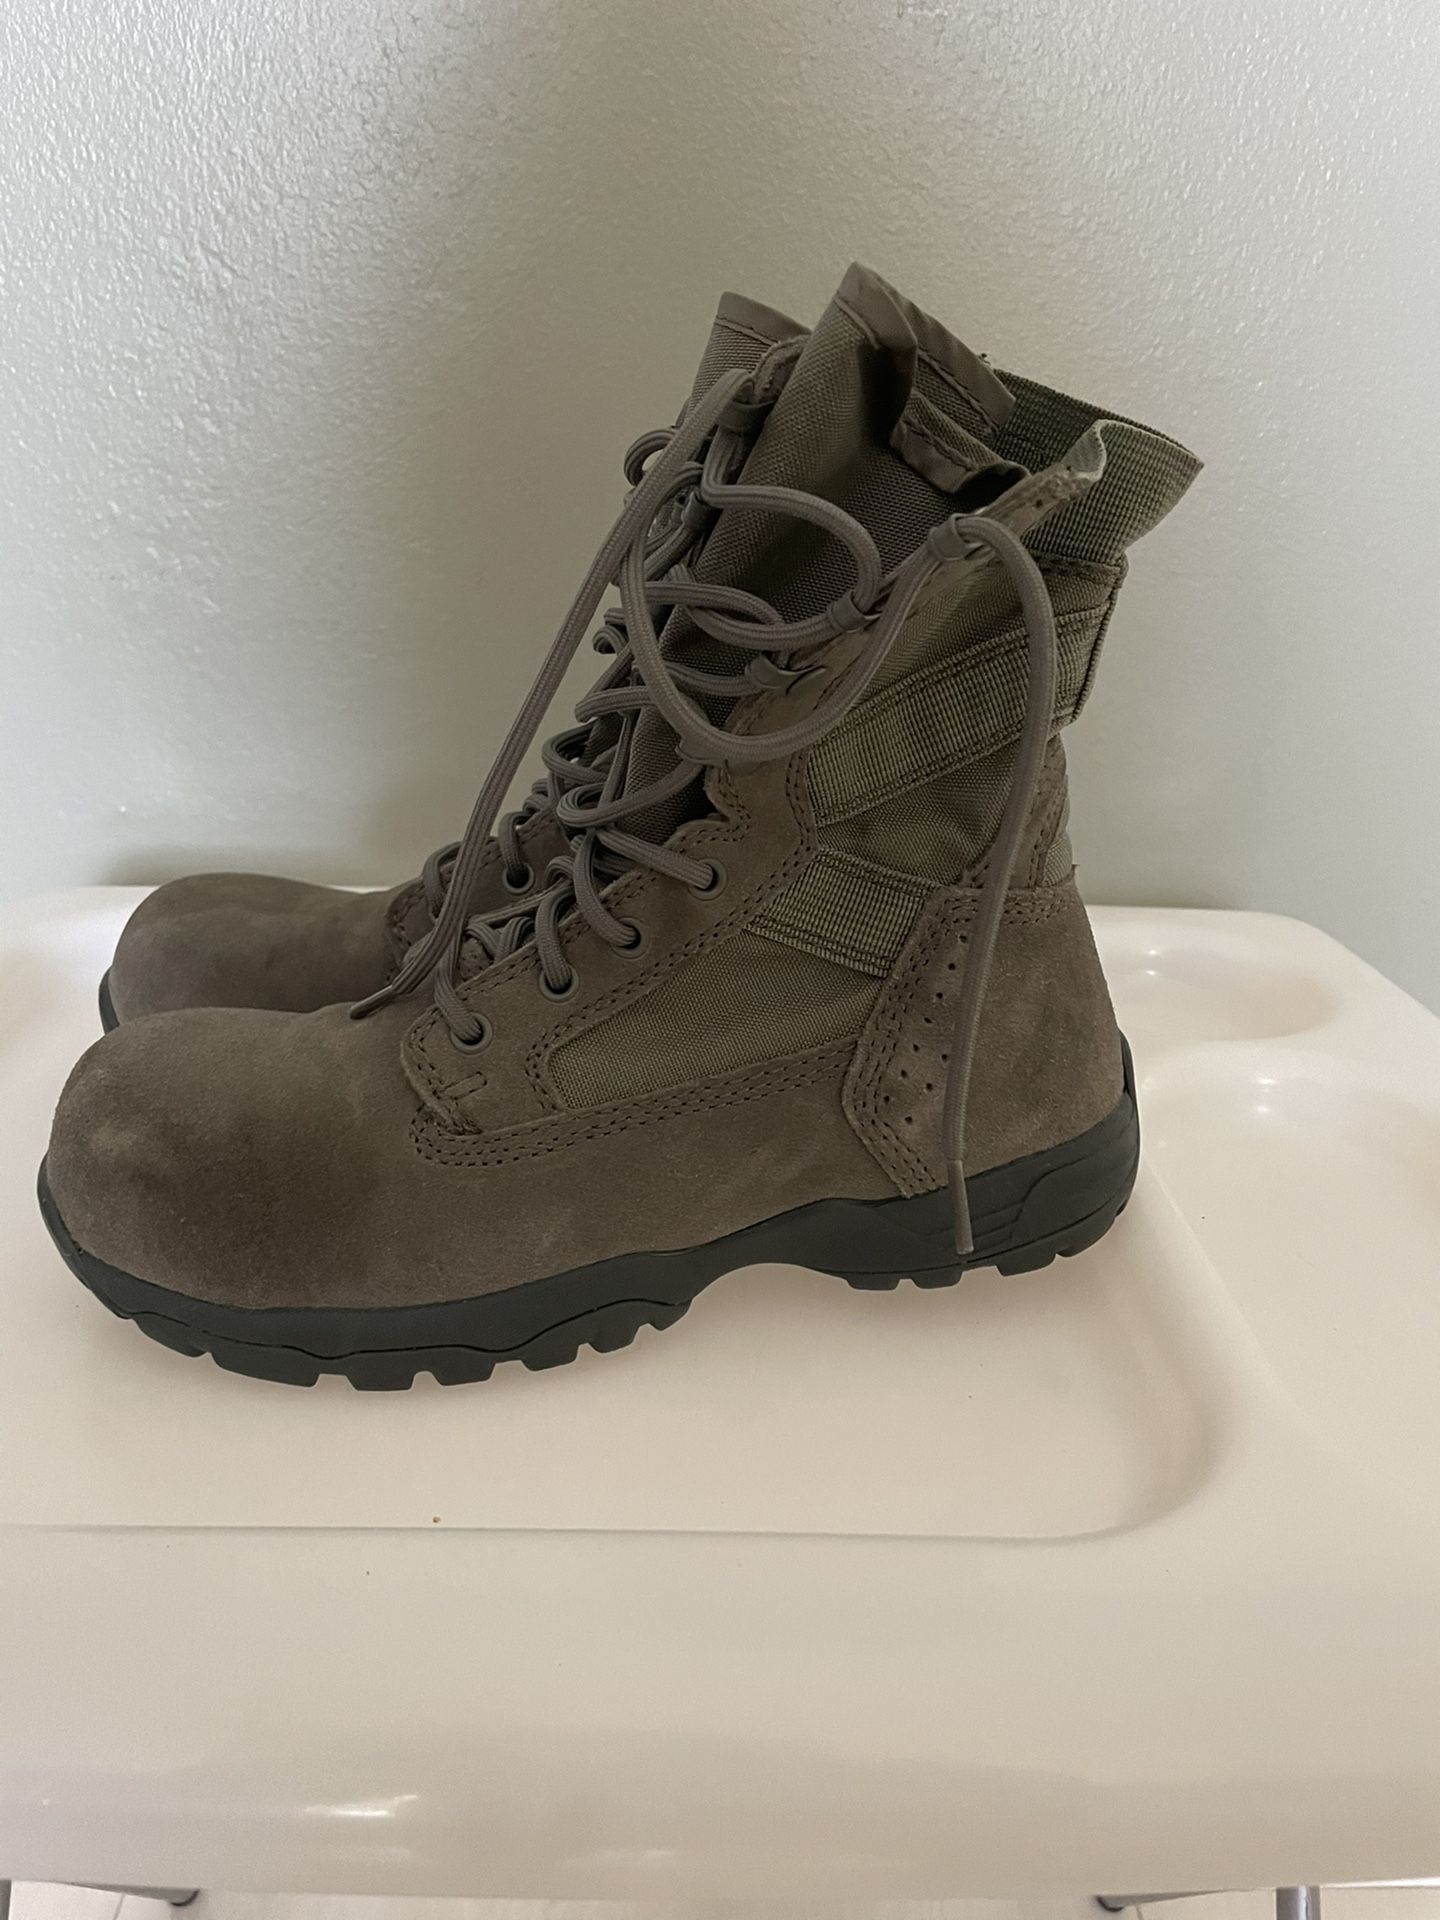 Military Steel Toe Boots Olive Green